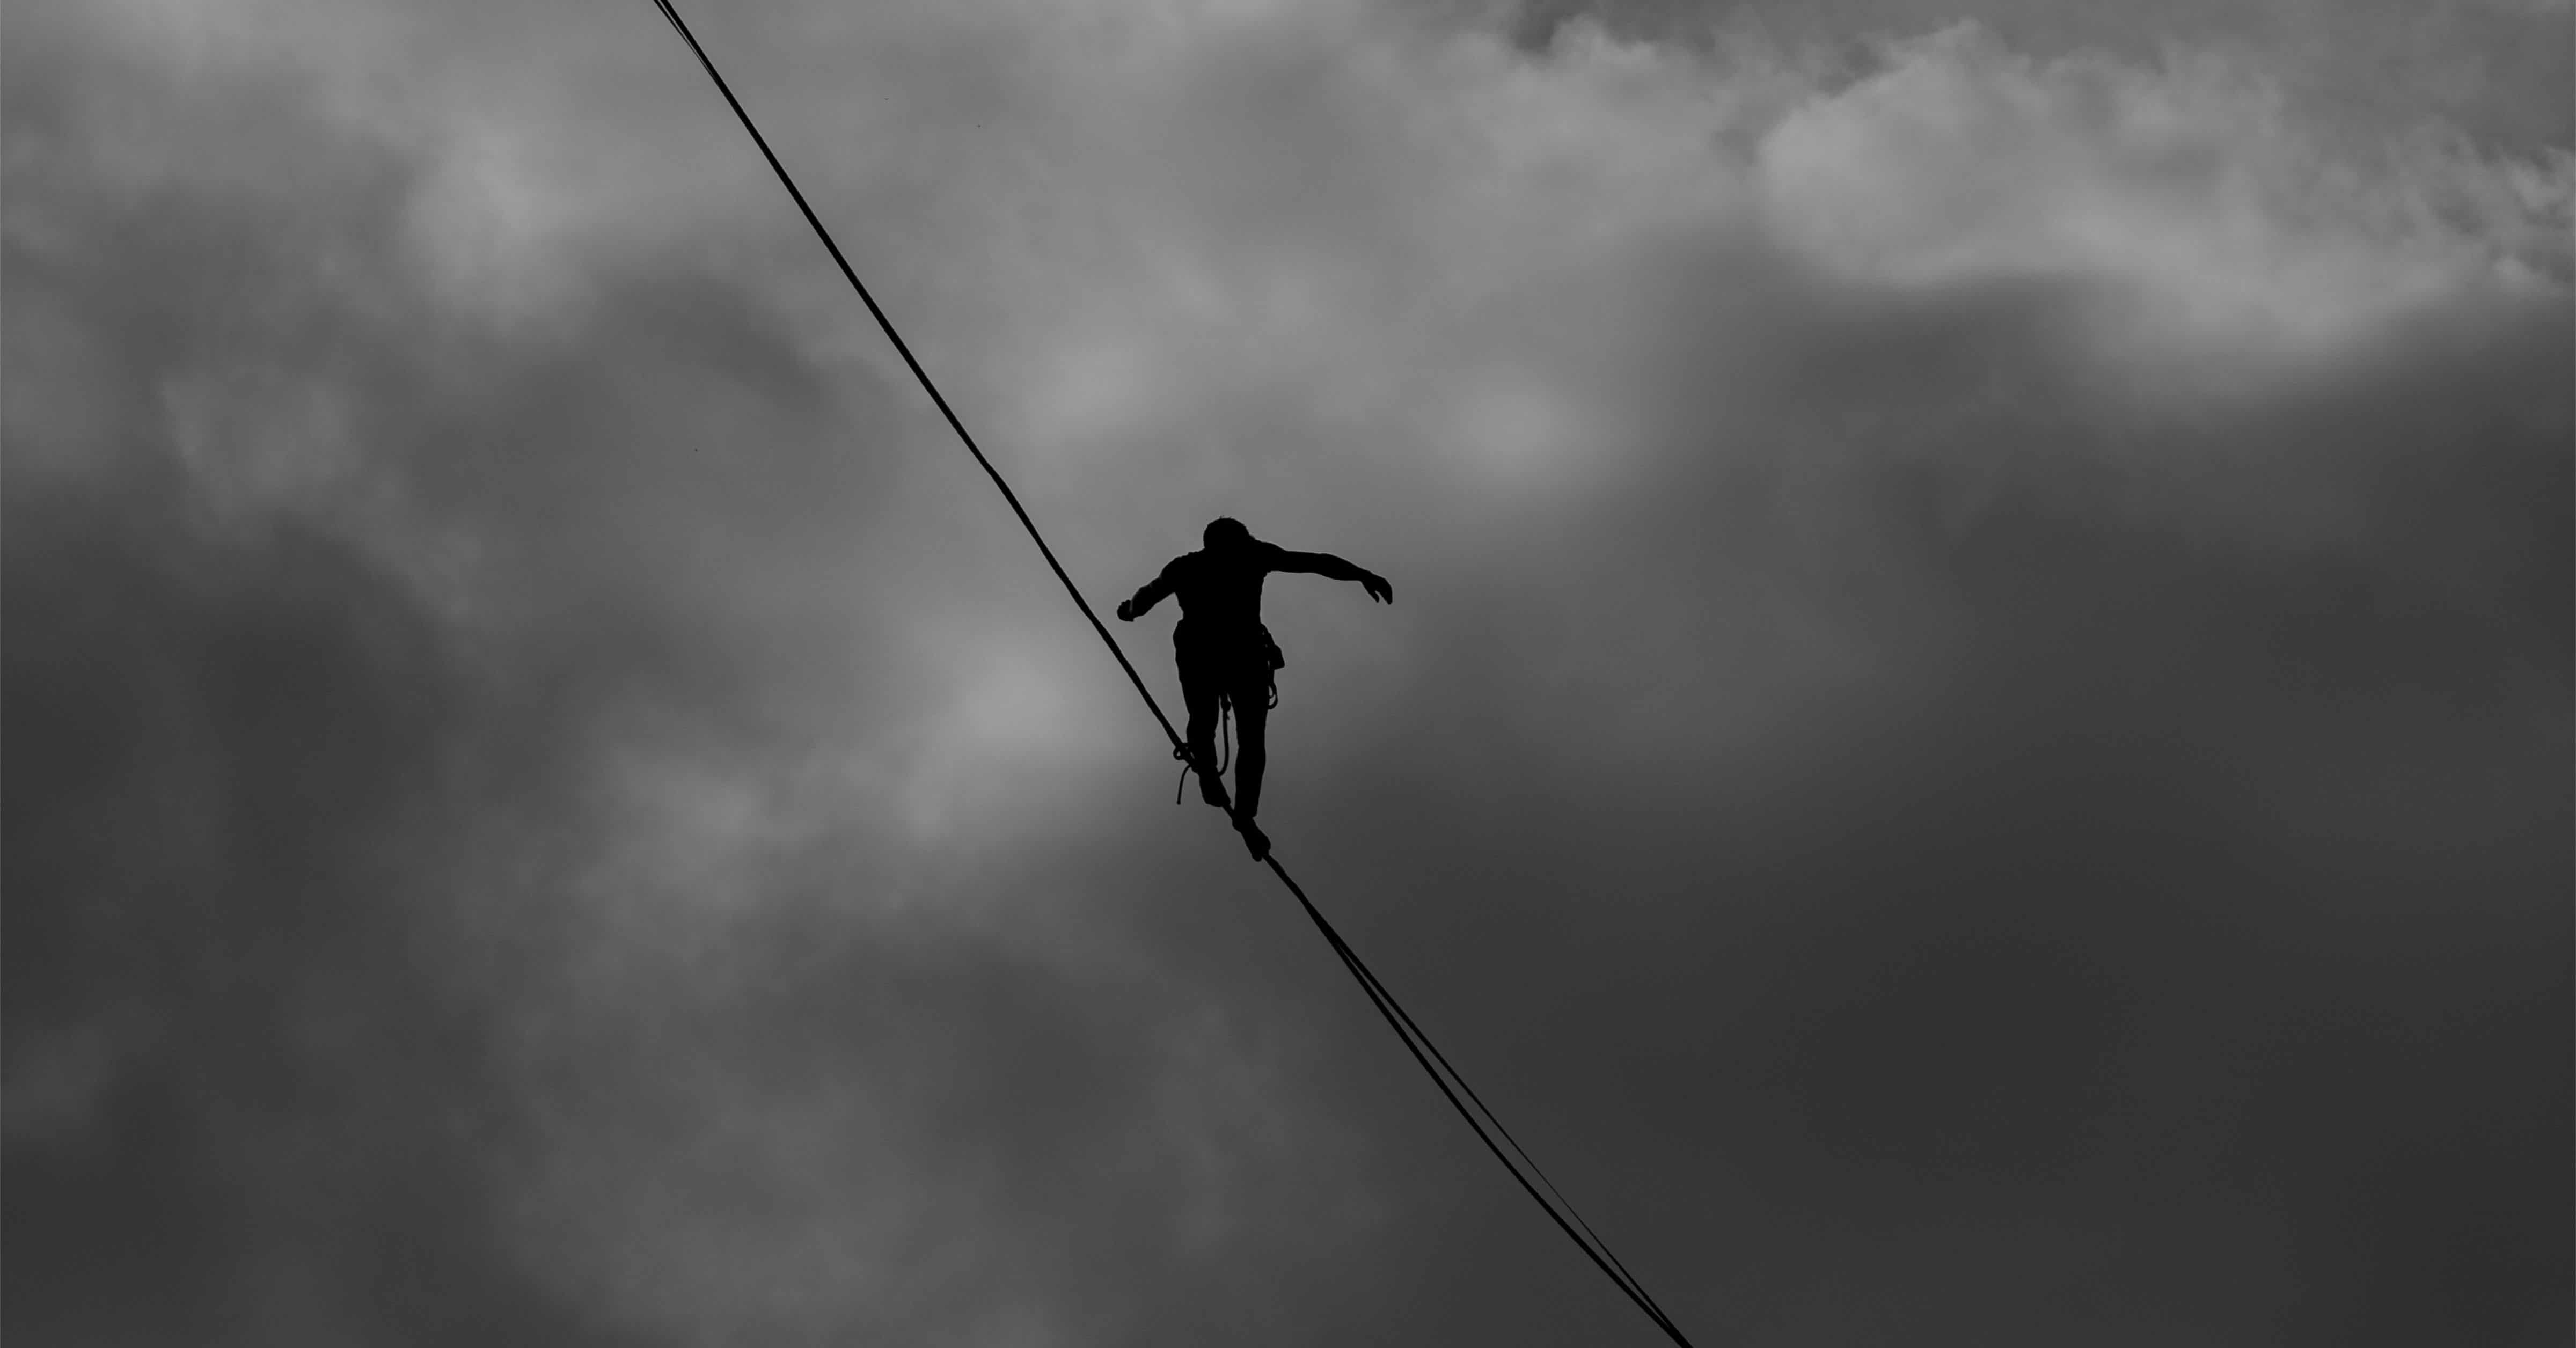 Millennial Perspective: Walking the Tightrope of Life